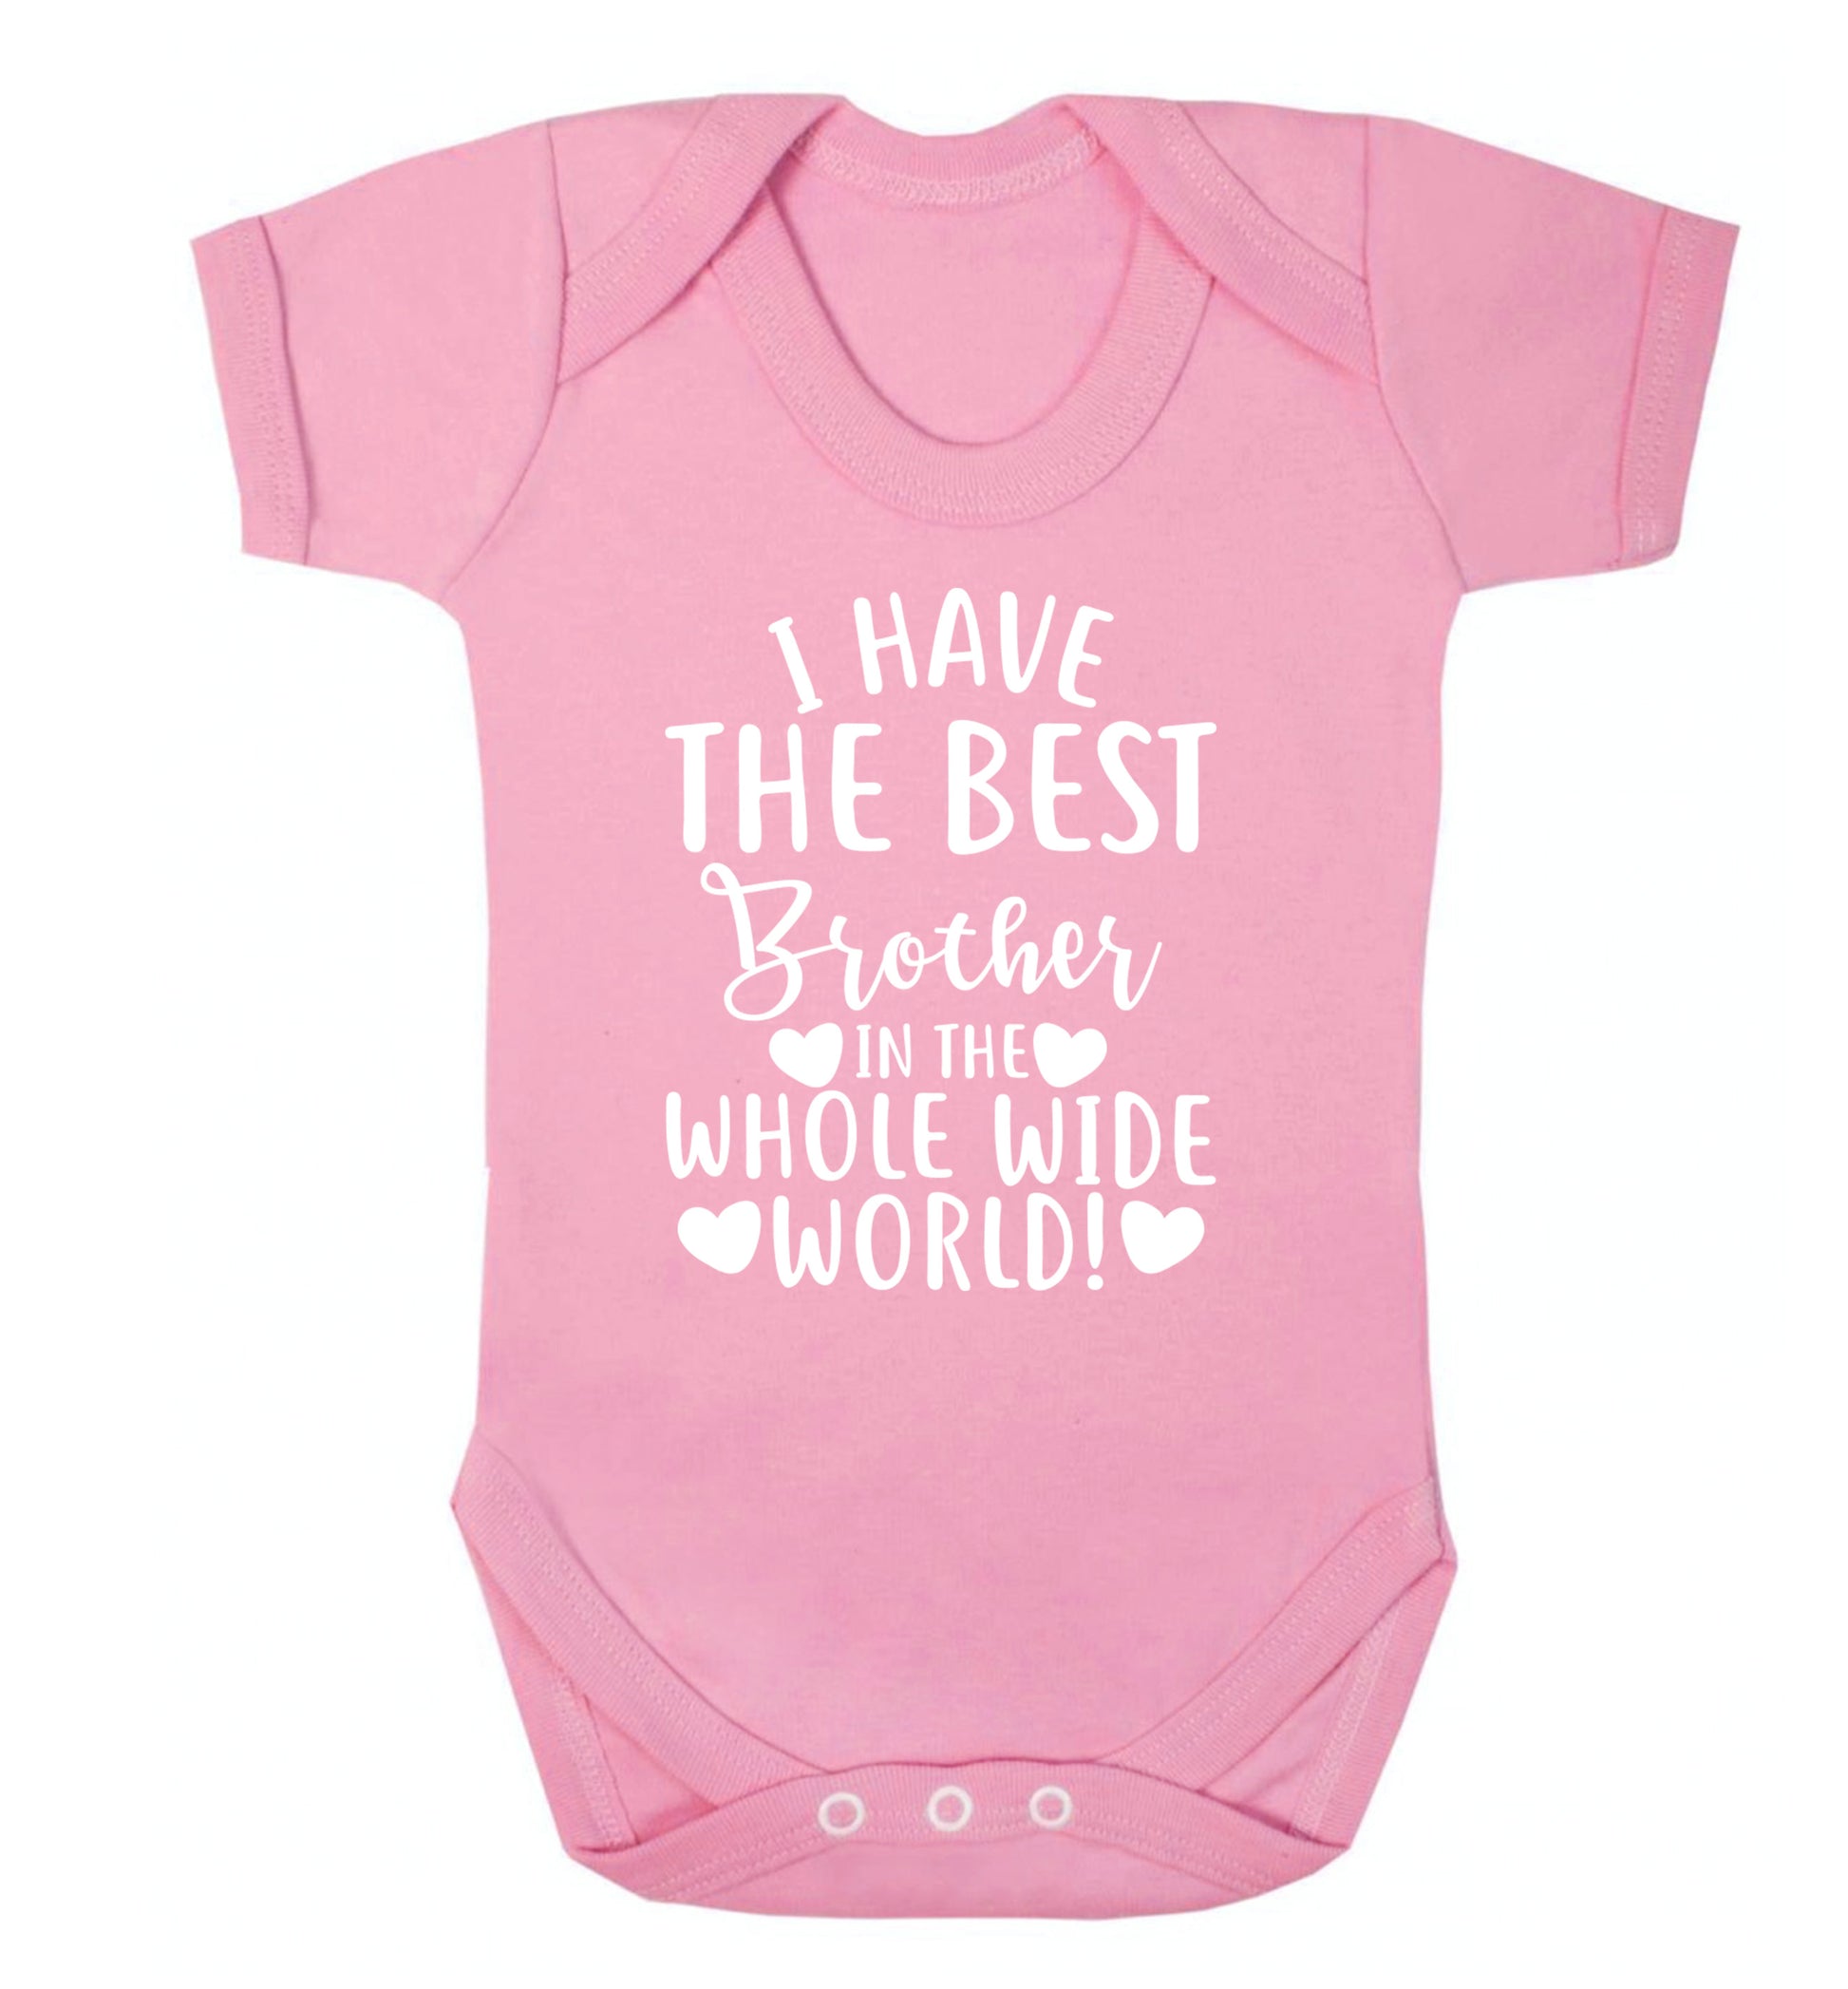 I have the best brother in the whole wide world! Baby Vest pale pink 18-24 months